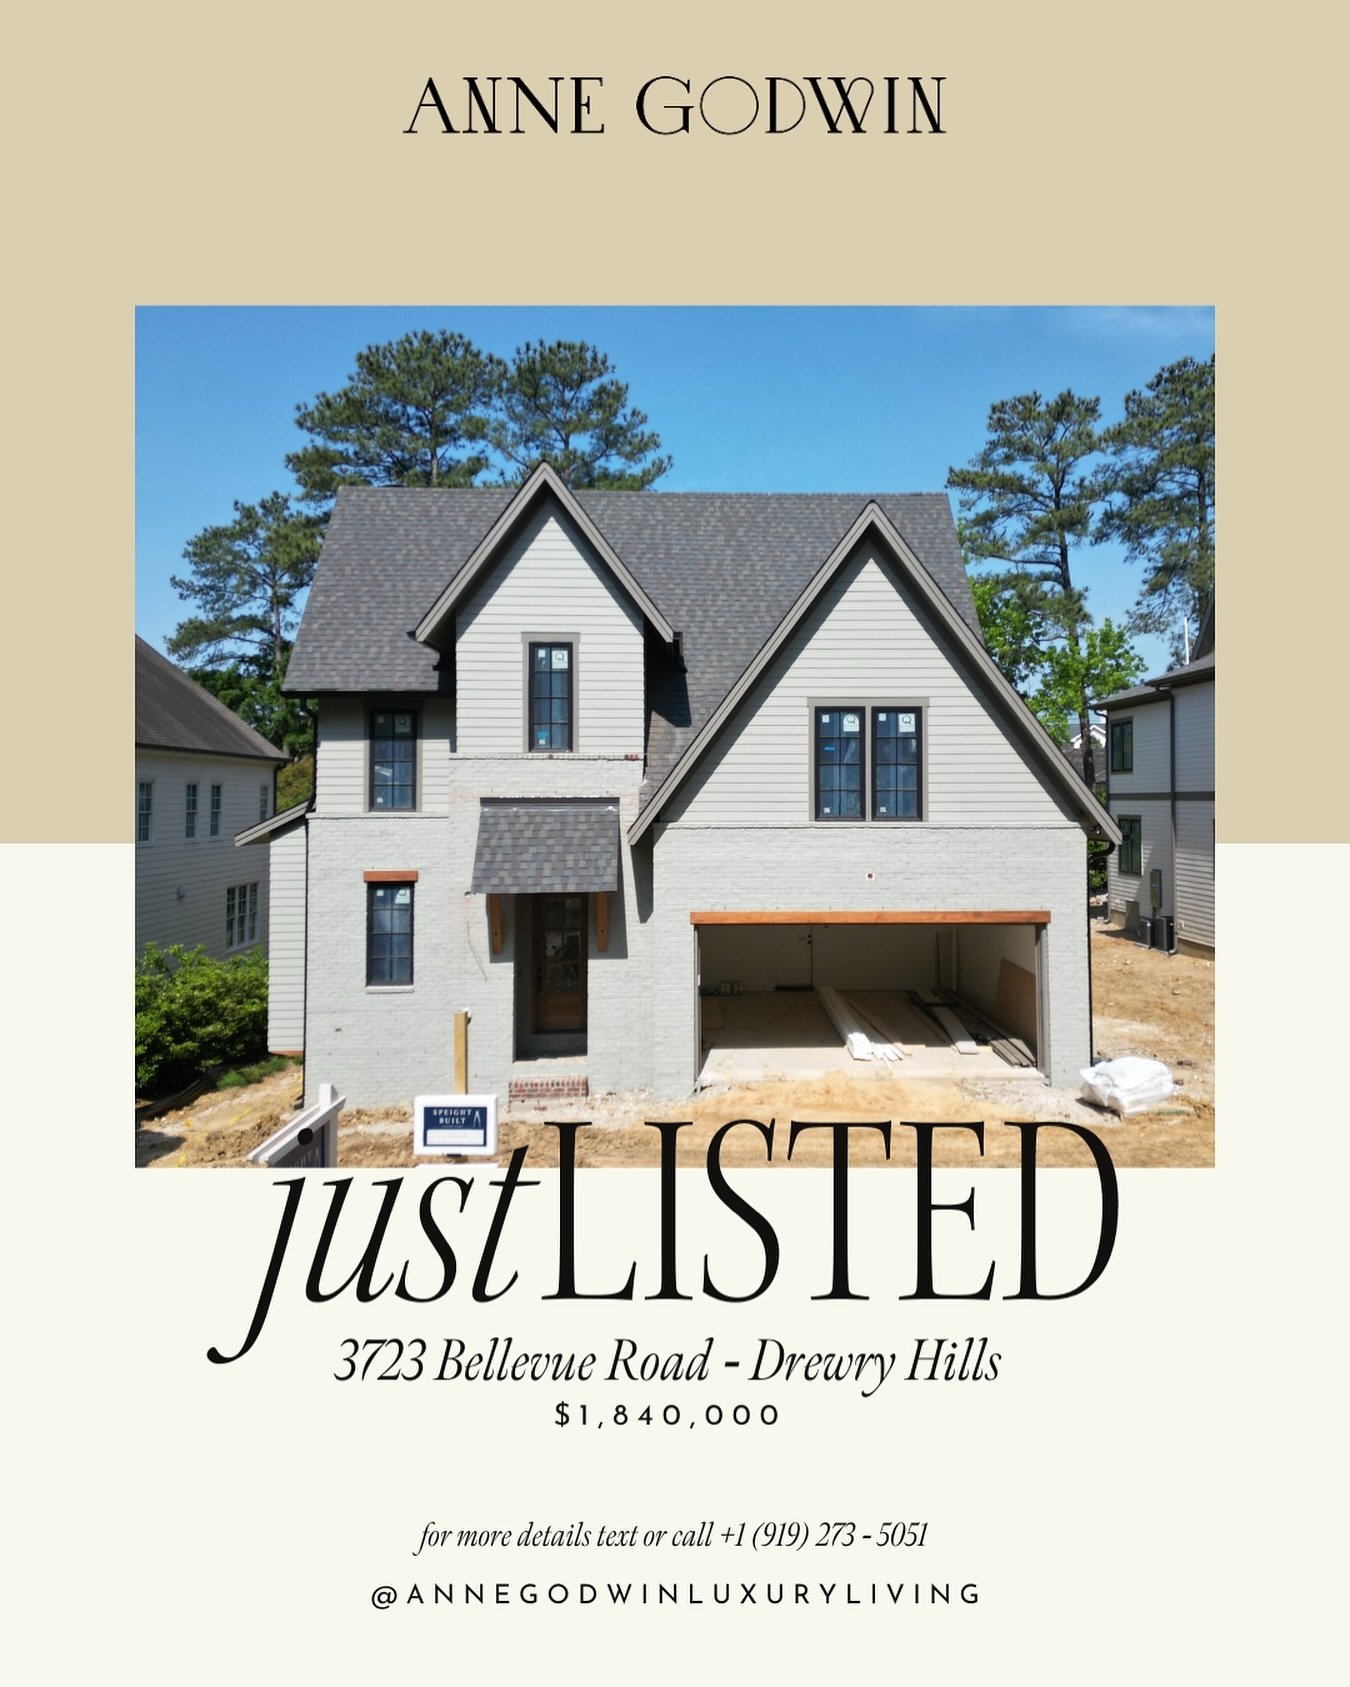 JUST LISTED in Drewry Hills, just steps away from North Hills! 

Schedule a tour of this @speightbuilt home designed by @frusteriodesign 

This home has everything you need and more - for more info or to schedule a private tour send us a dm or call/t